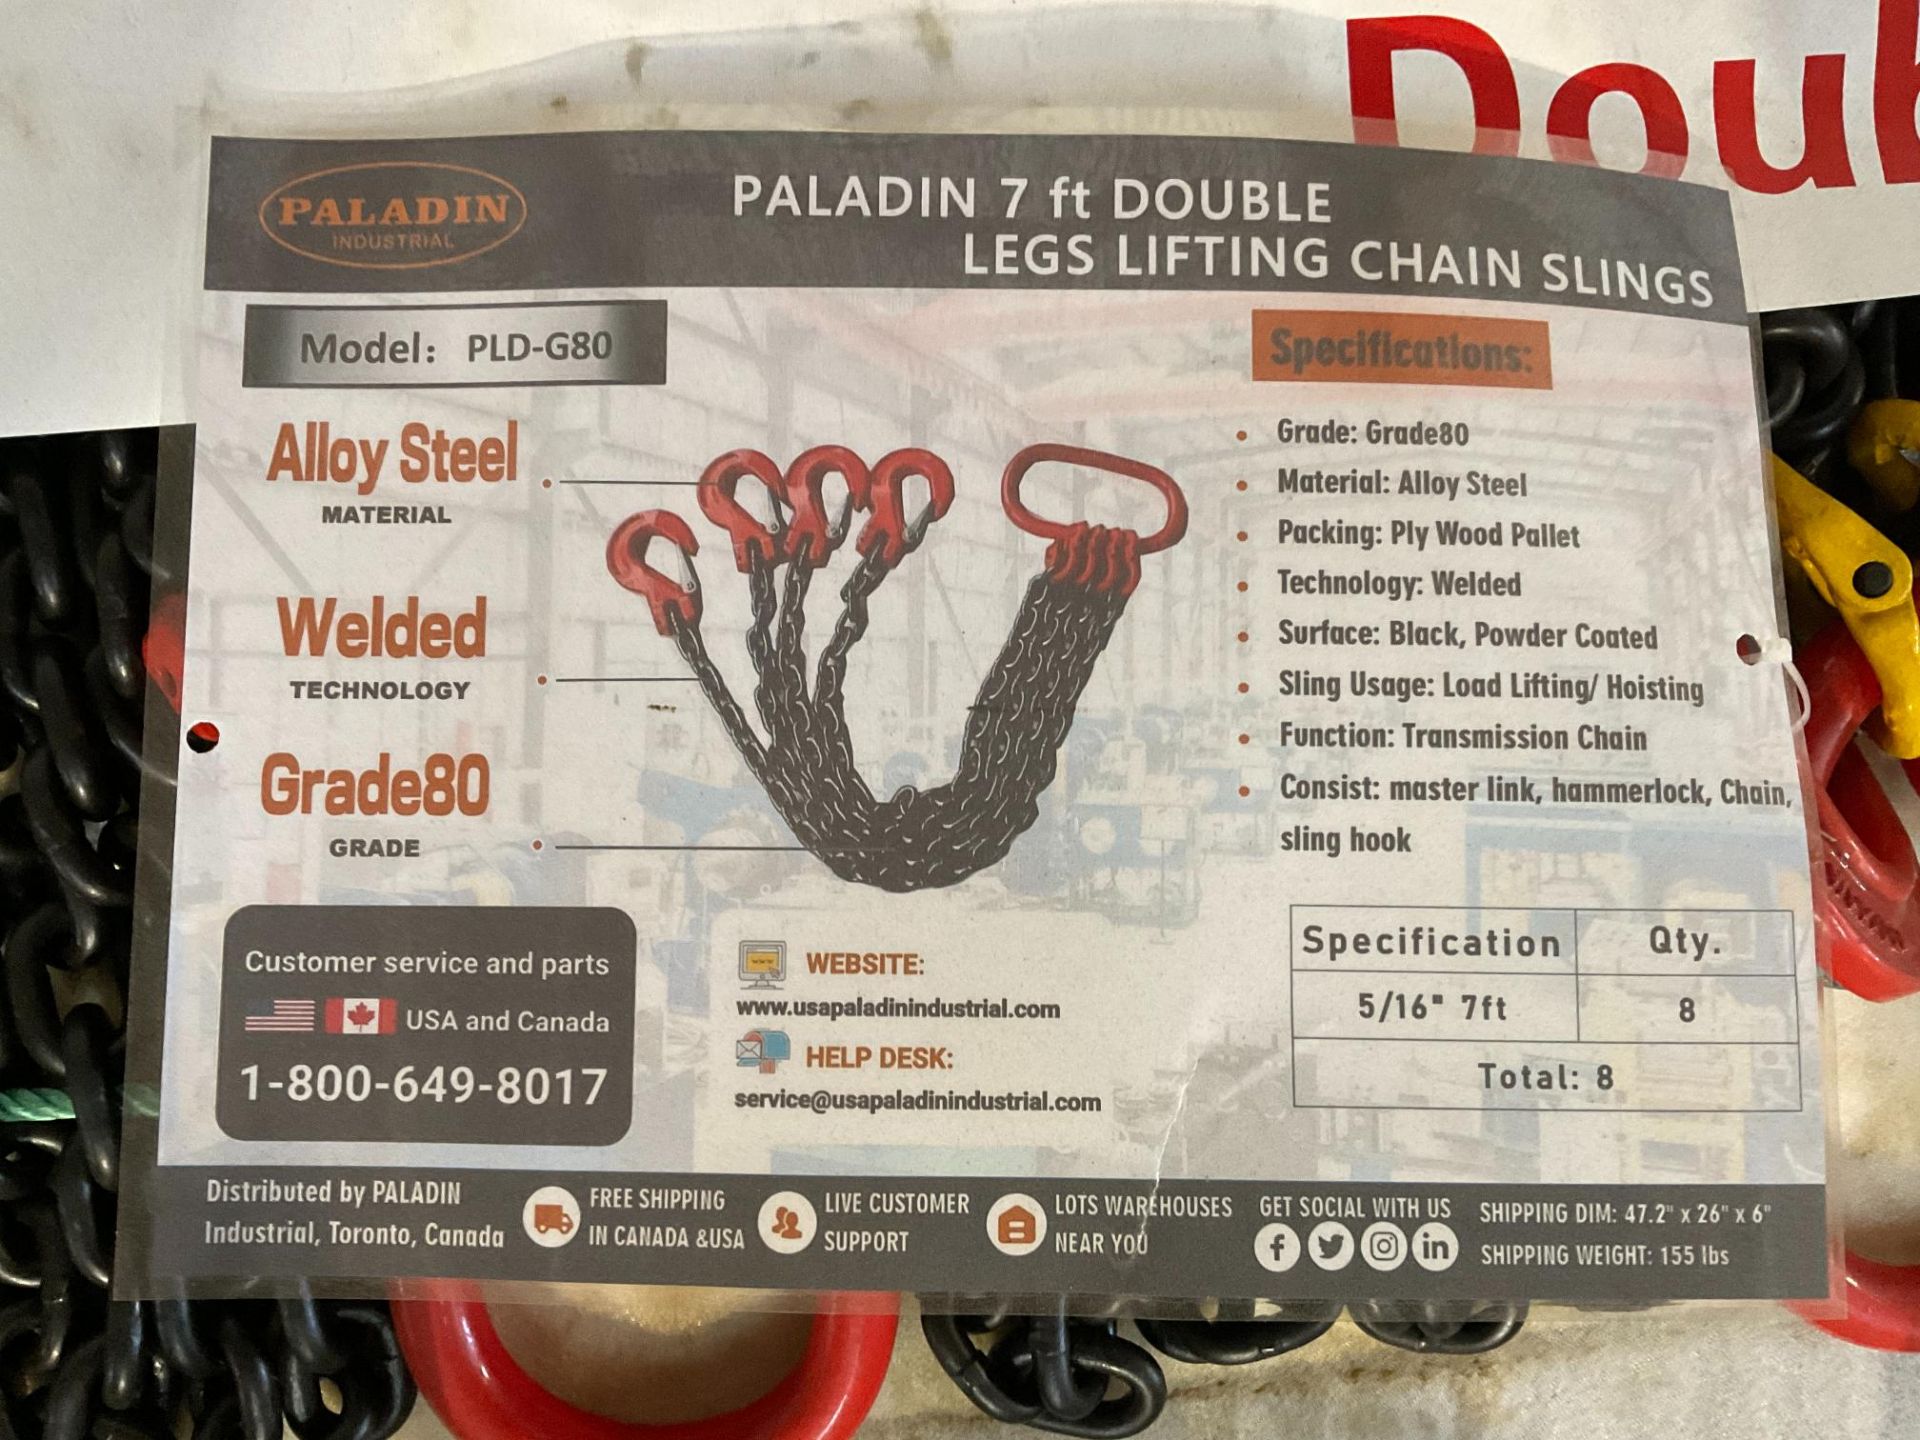 Paladin 7' Double Legs Lifting Chain Slings - Image 2 of 2